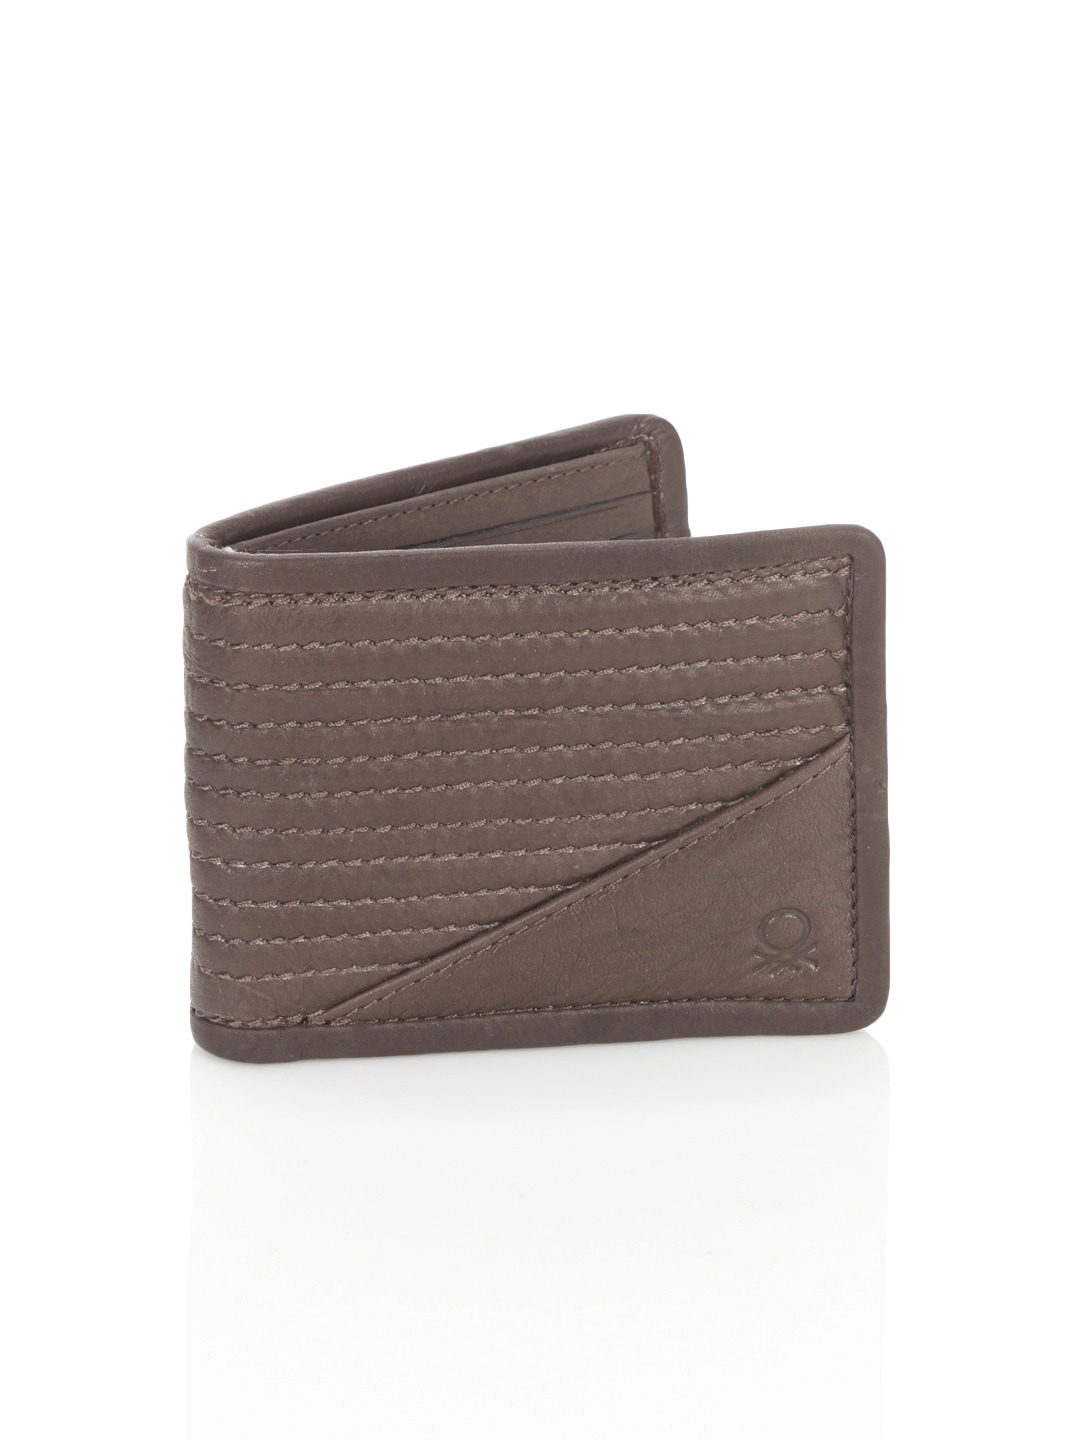 United Colors of Benetton Men Leather Brown Wallet